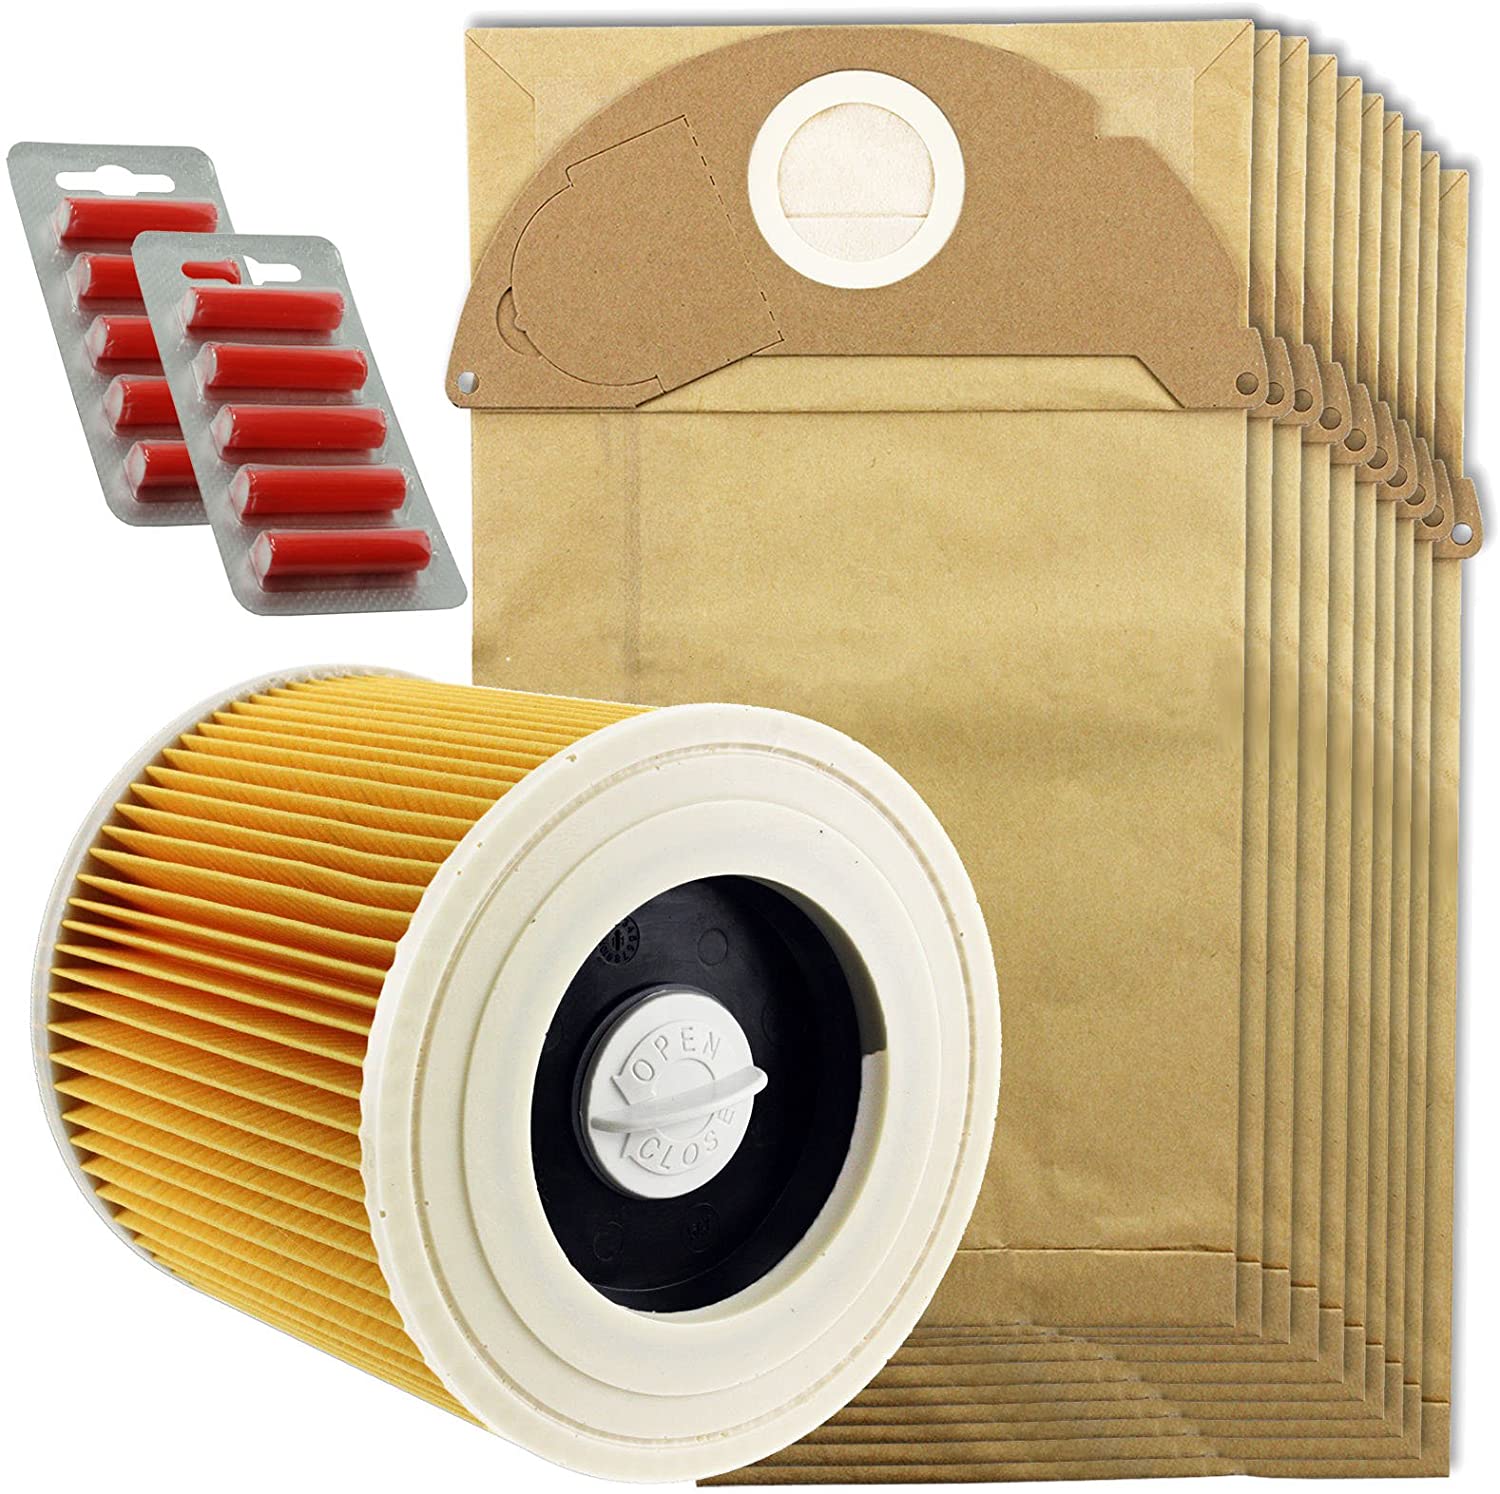 10 x Wet & Dry Vacuum Dust Bags & Hoover Filter For KARCHER A2024PT A2074PT + Fresheners